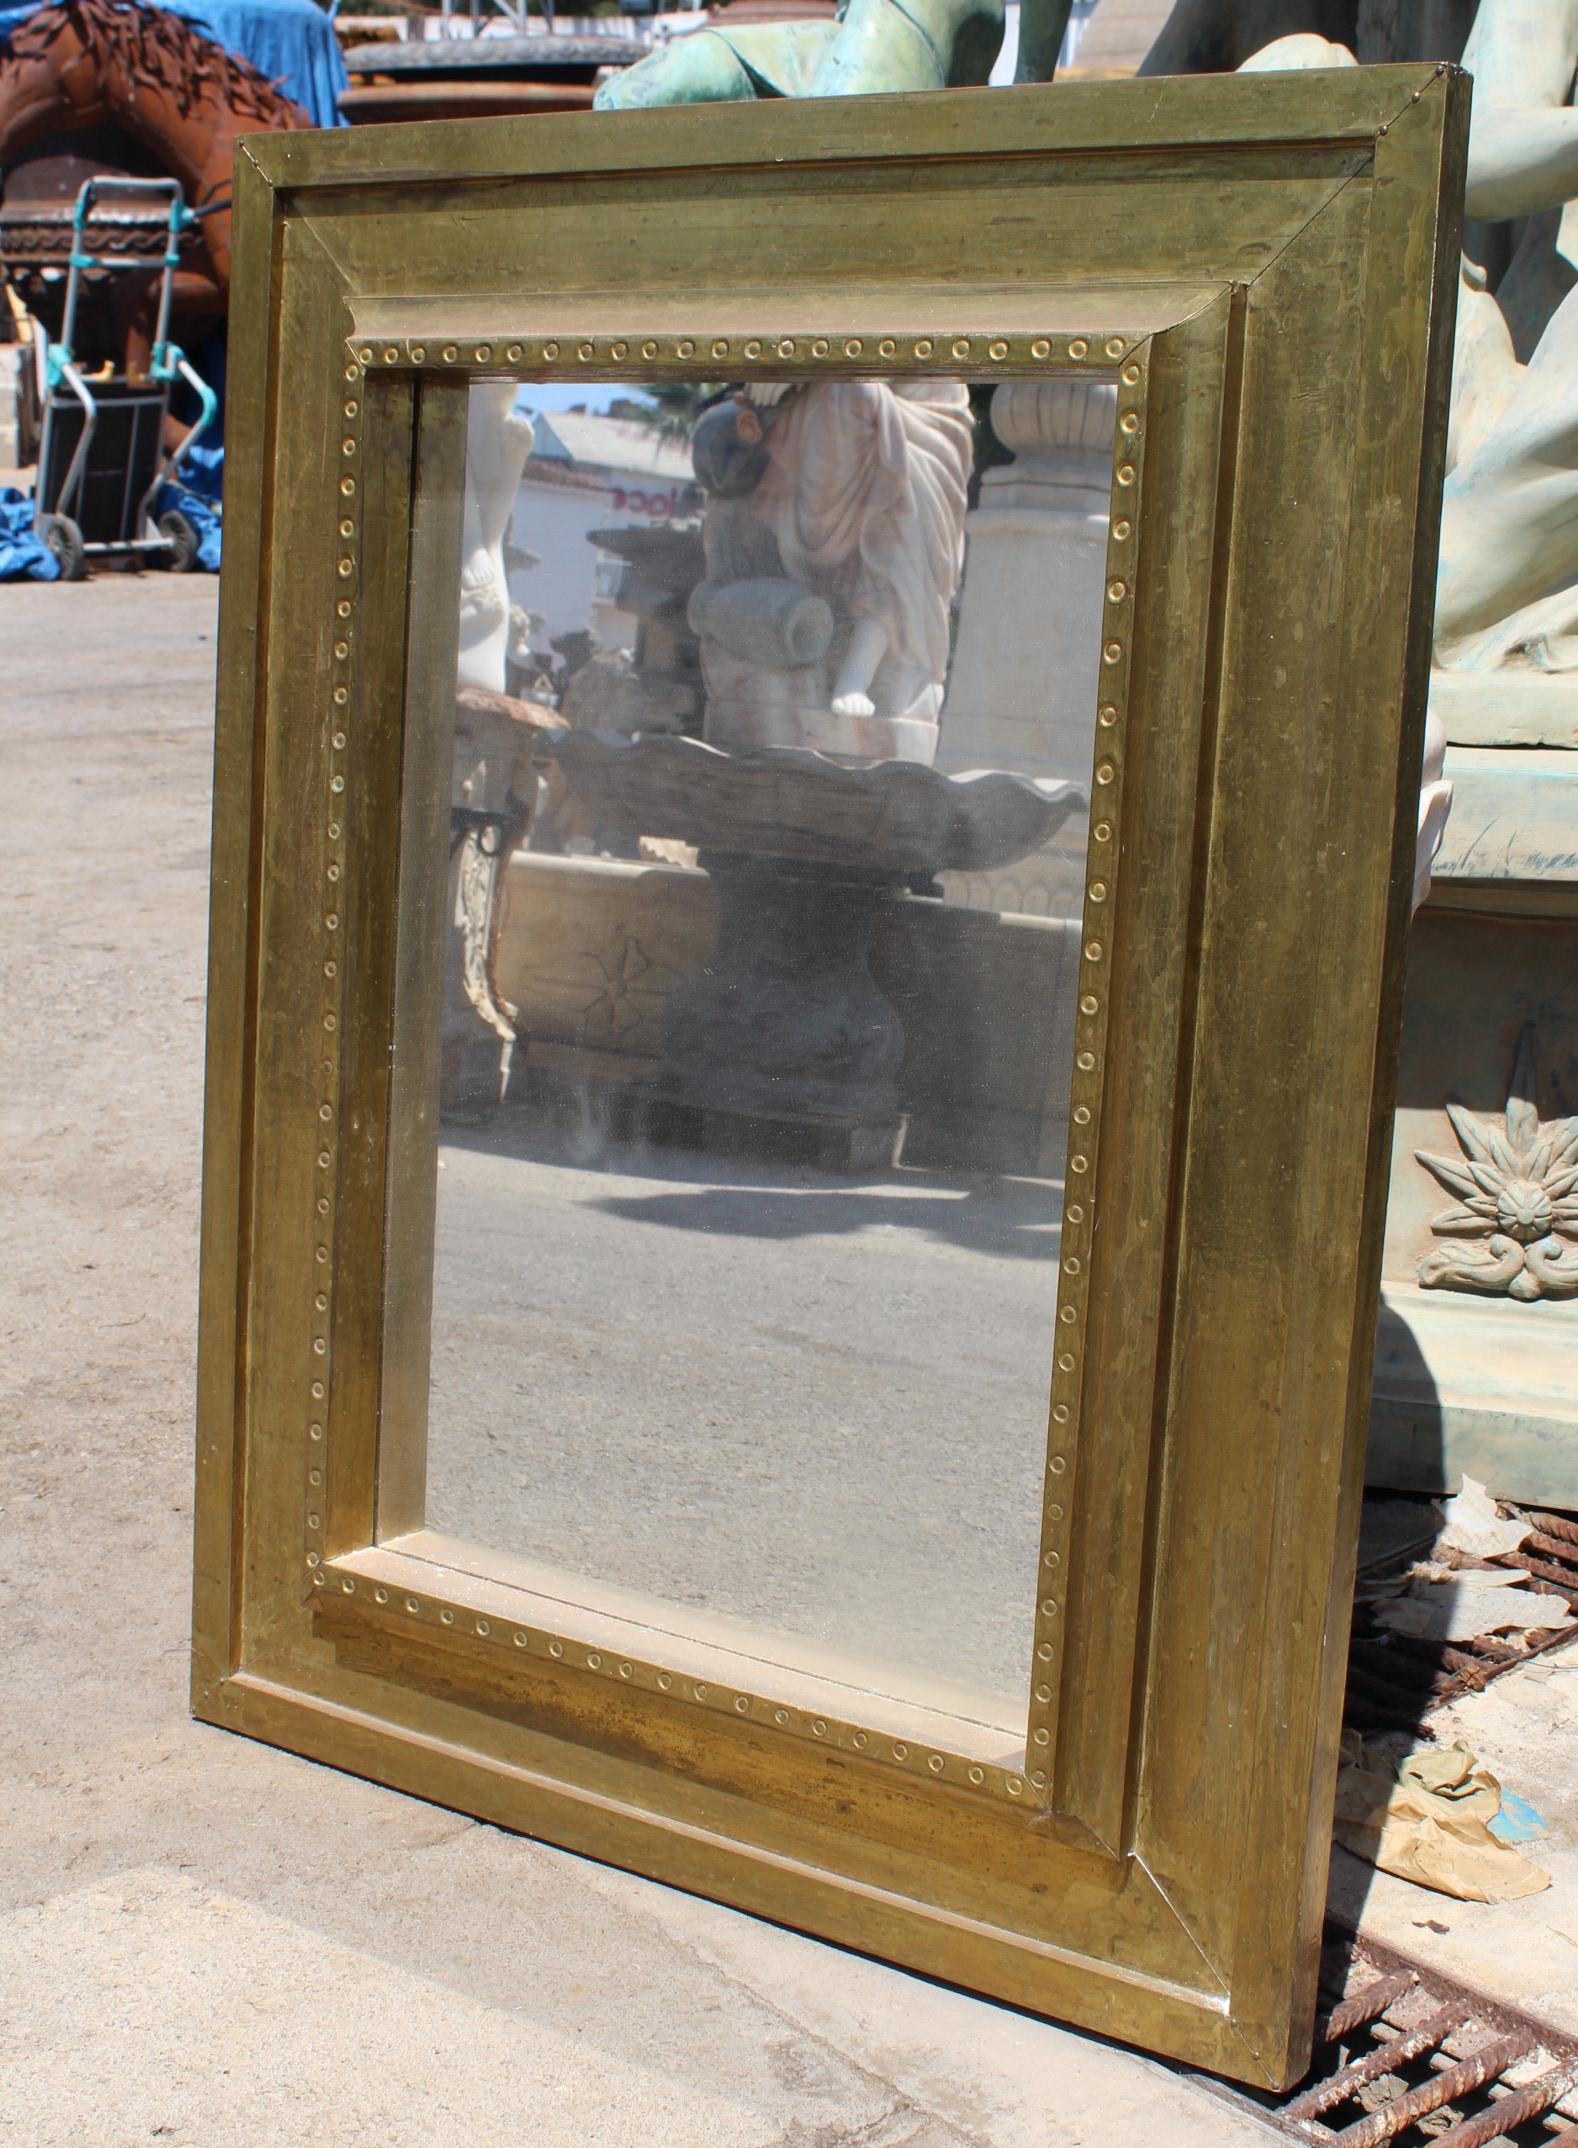 1970s handcrafted gilded brass panels stamped over a wooden frame mirror by Rodolfo Dubarry's workshop in Marbella. 

50 years ago, Argentinian furniture designer Rodolfo Dubarry set up a workshop in Spain and popularised the use of gilded brass